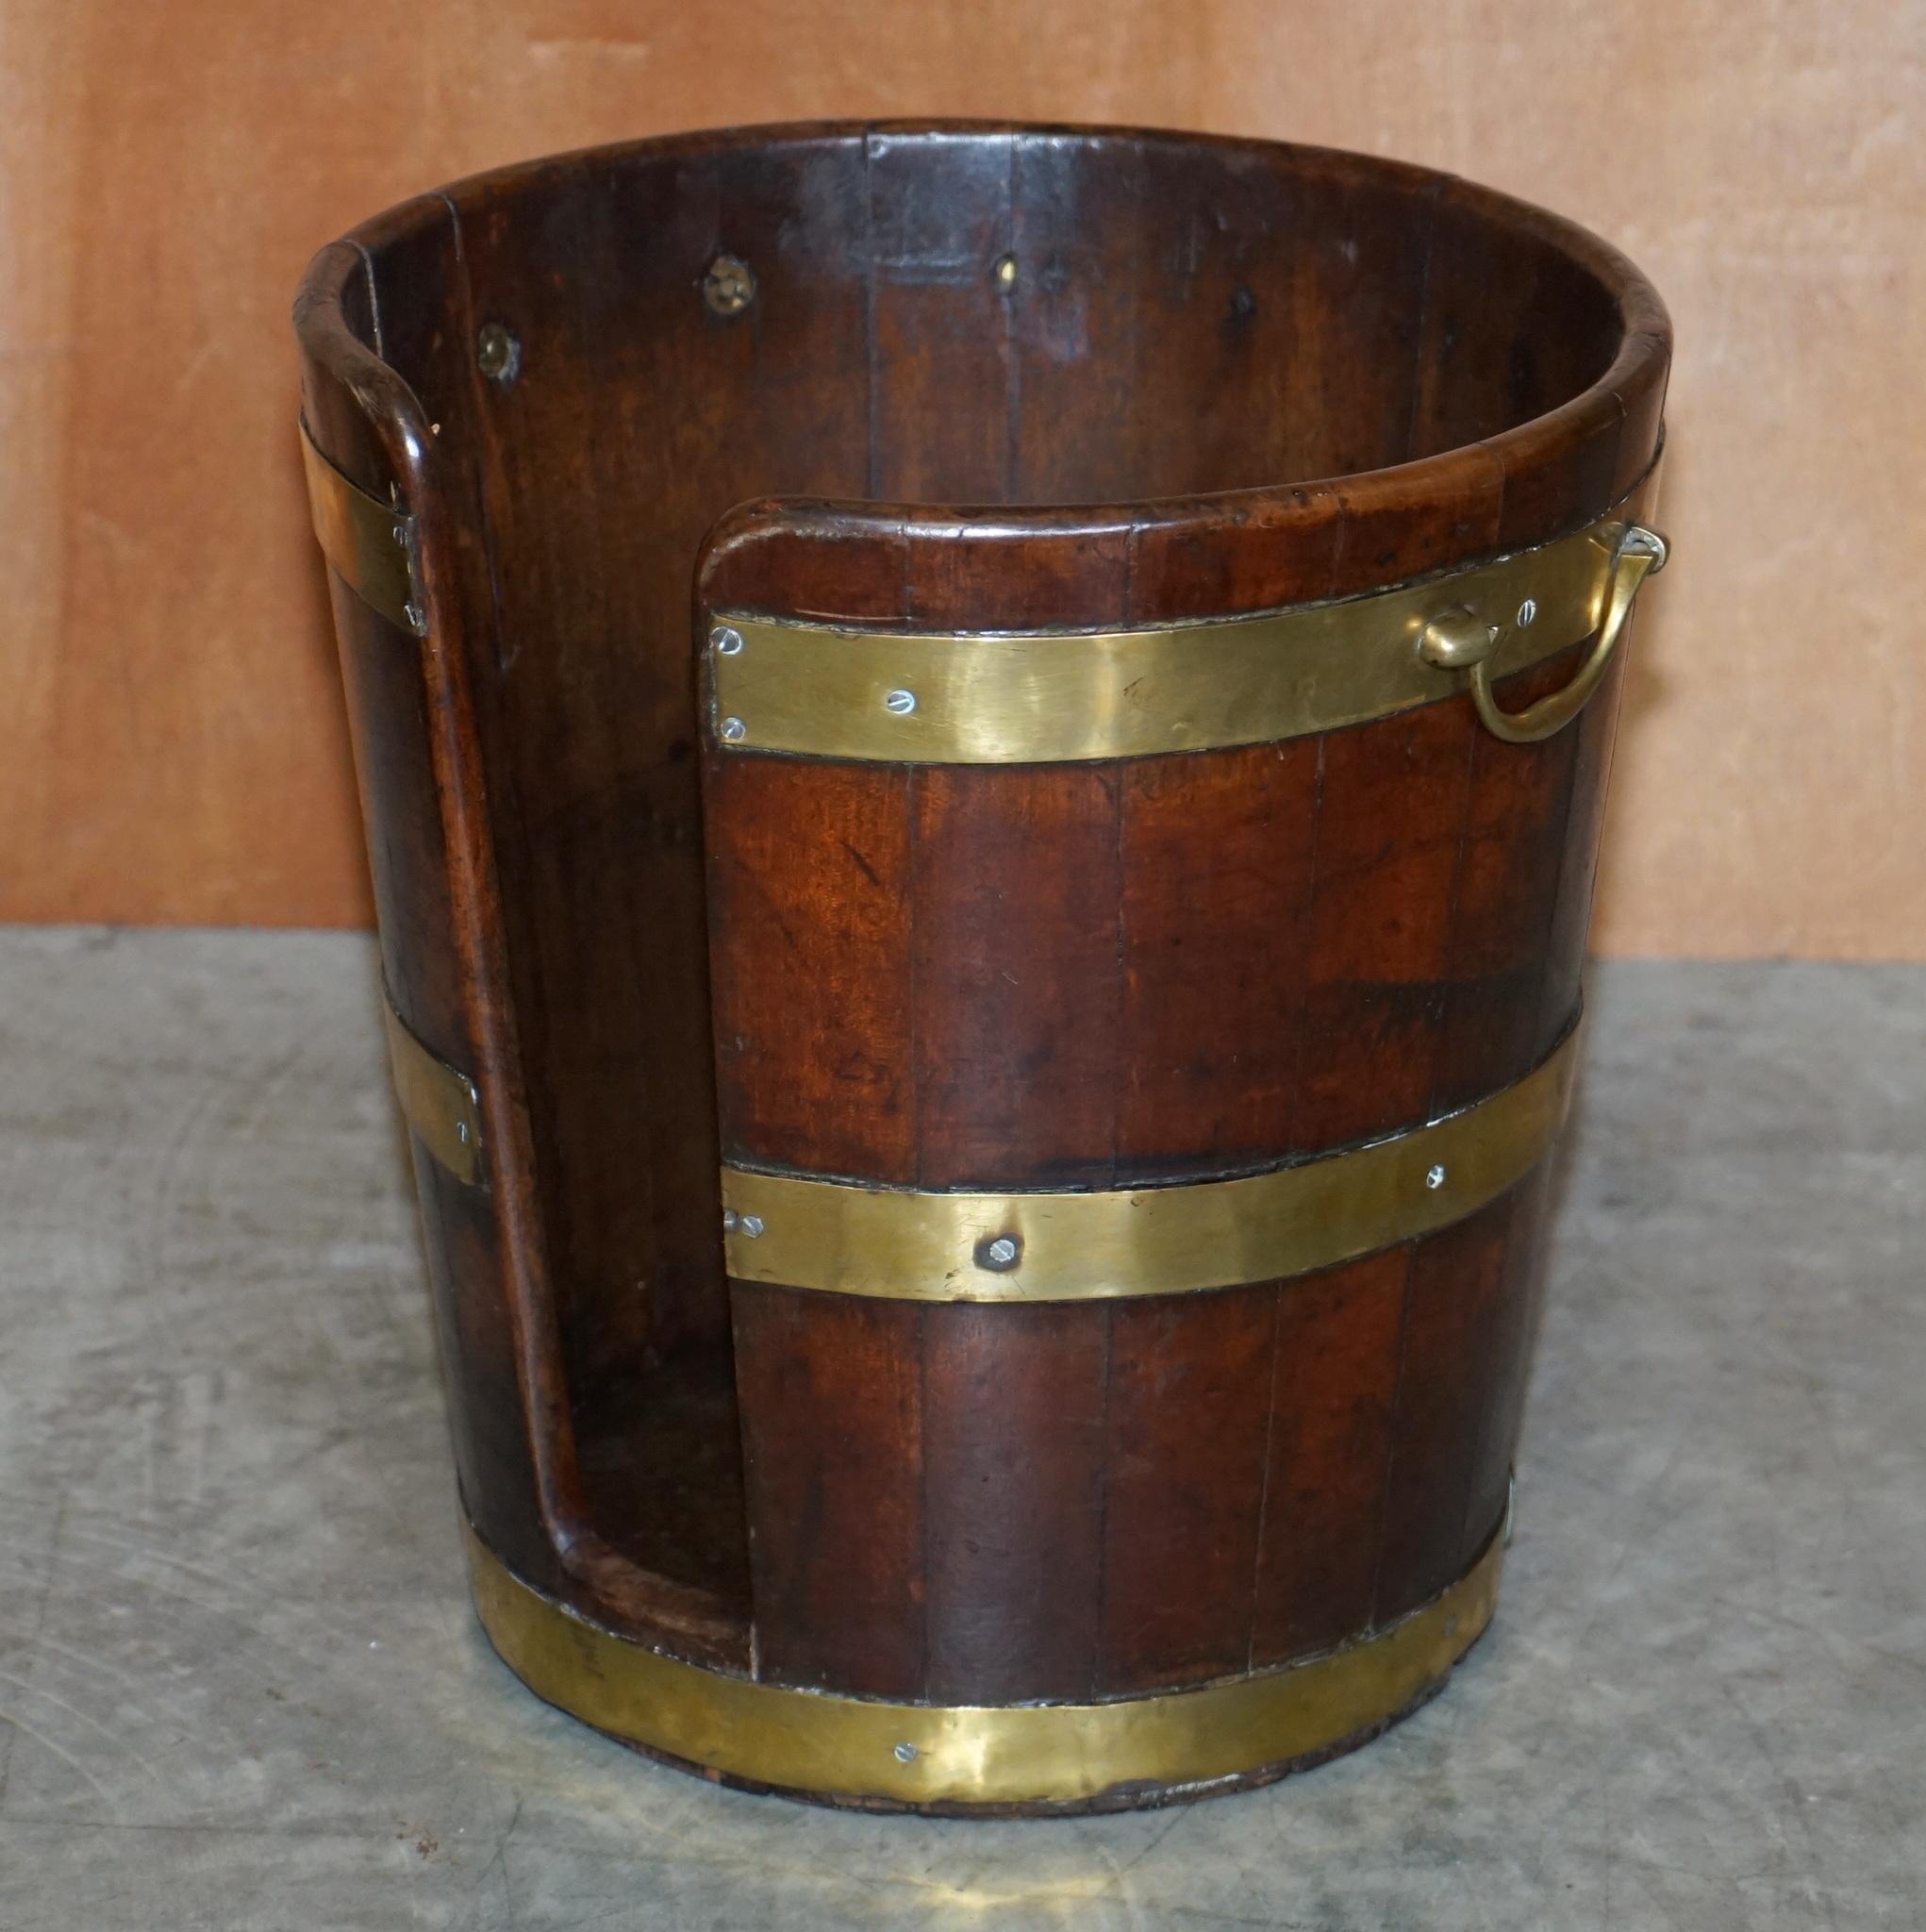 We are delighted to offer for sale this exquisite pair of large original George III plate buckets circa 1760 in the Military Campaign style, hand carved in mahogany with brass stap work

Highly collectable, handmade, these are just about as fine